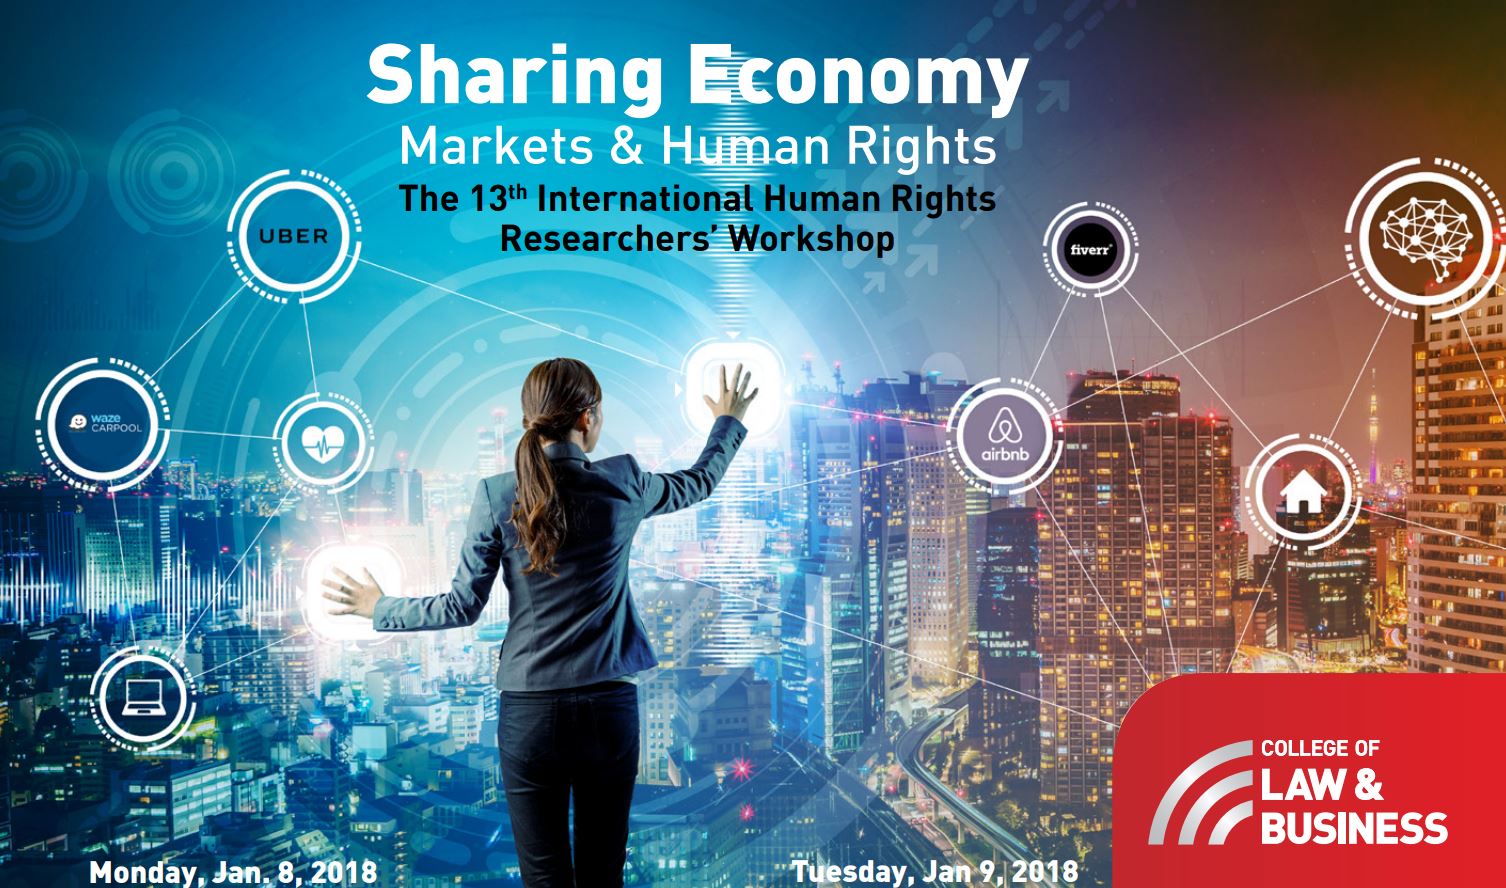 Sharing economy between Market and Human Rights